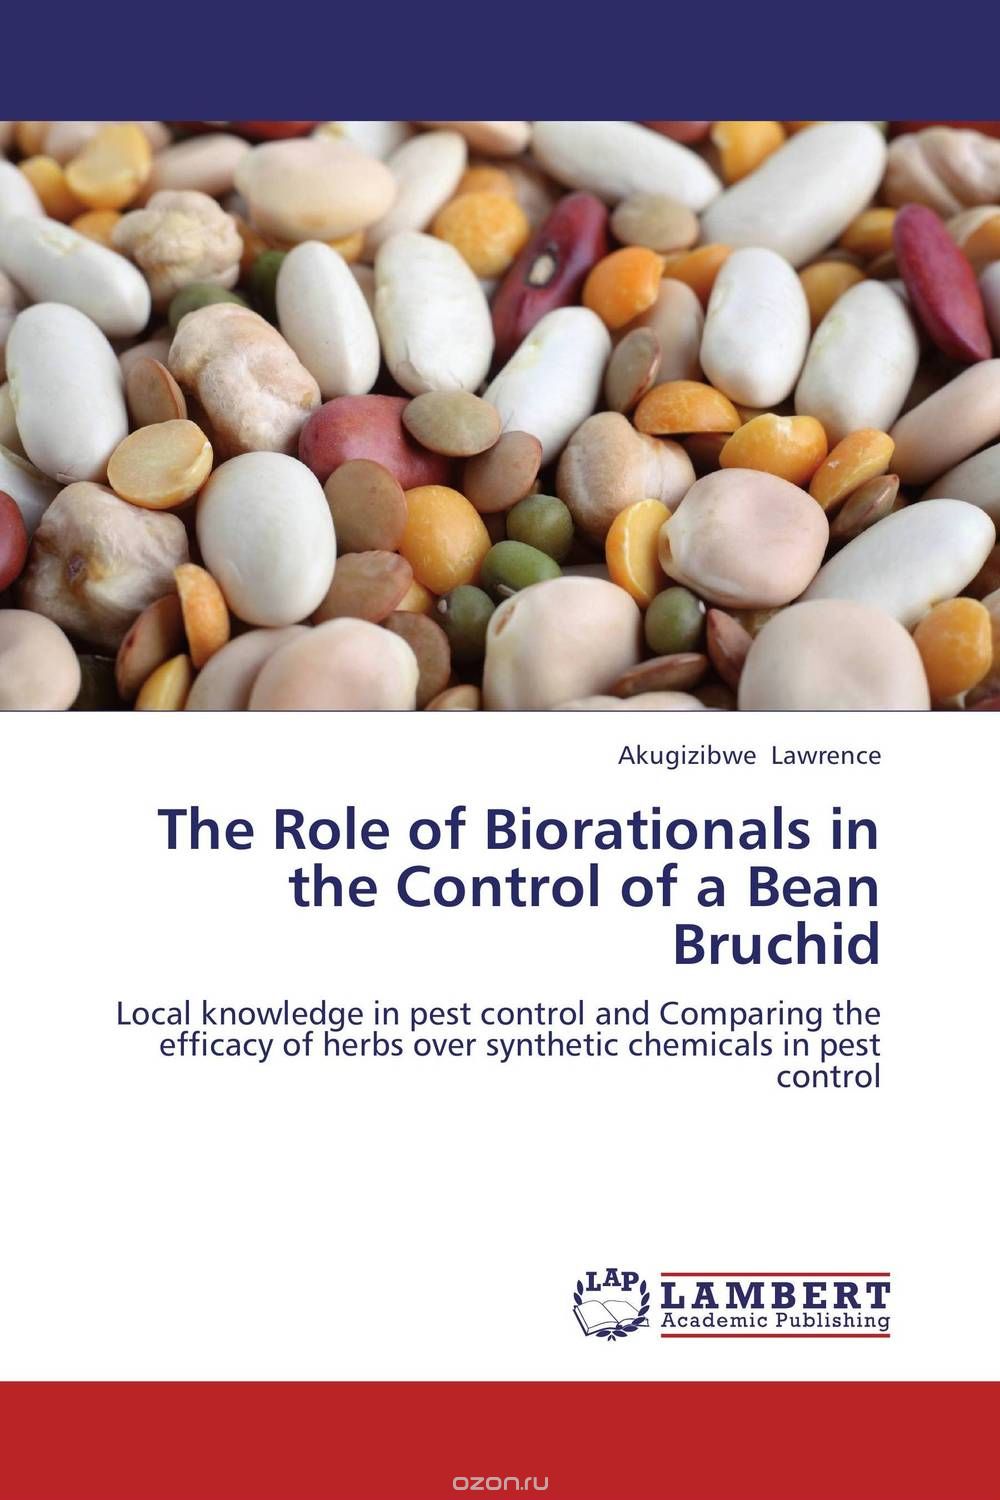 Скачать книгу "The Role of Biorationals in the Control of a Bean Bruchid"